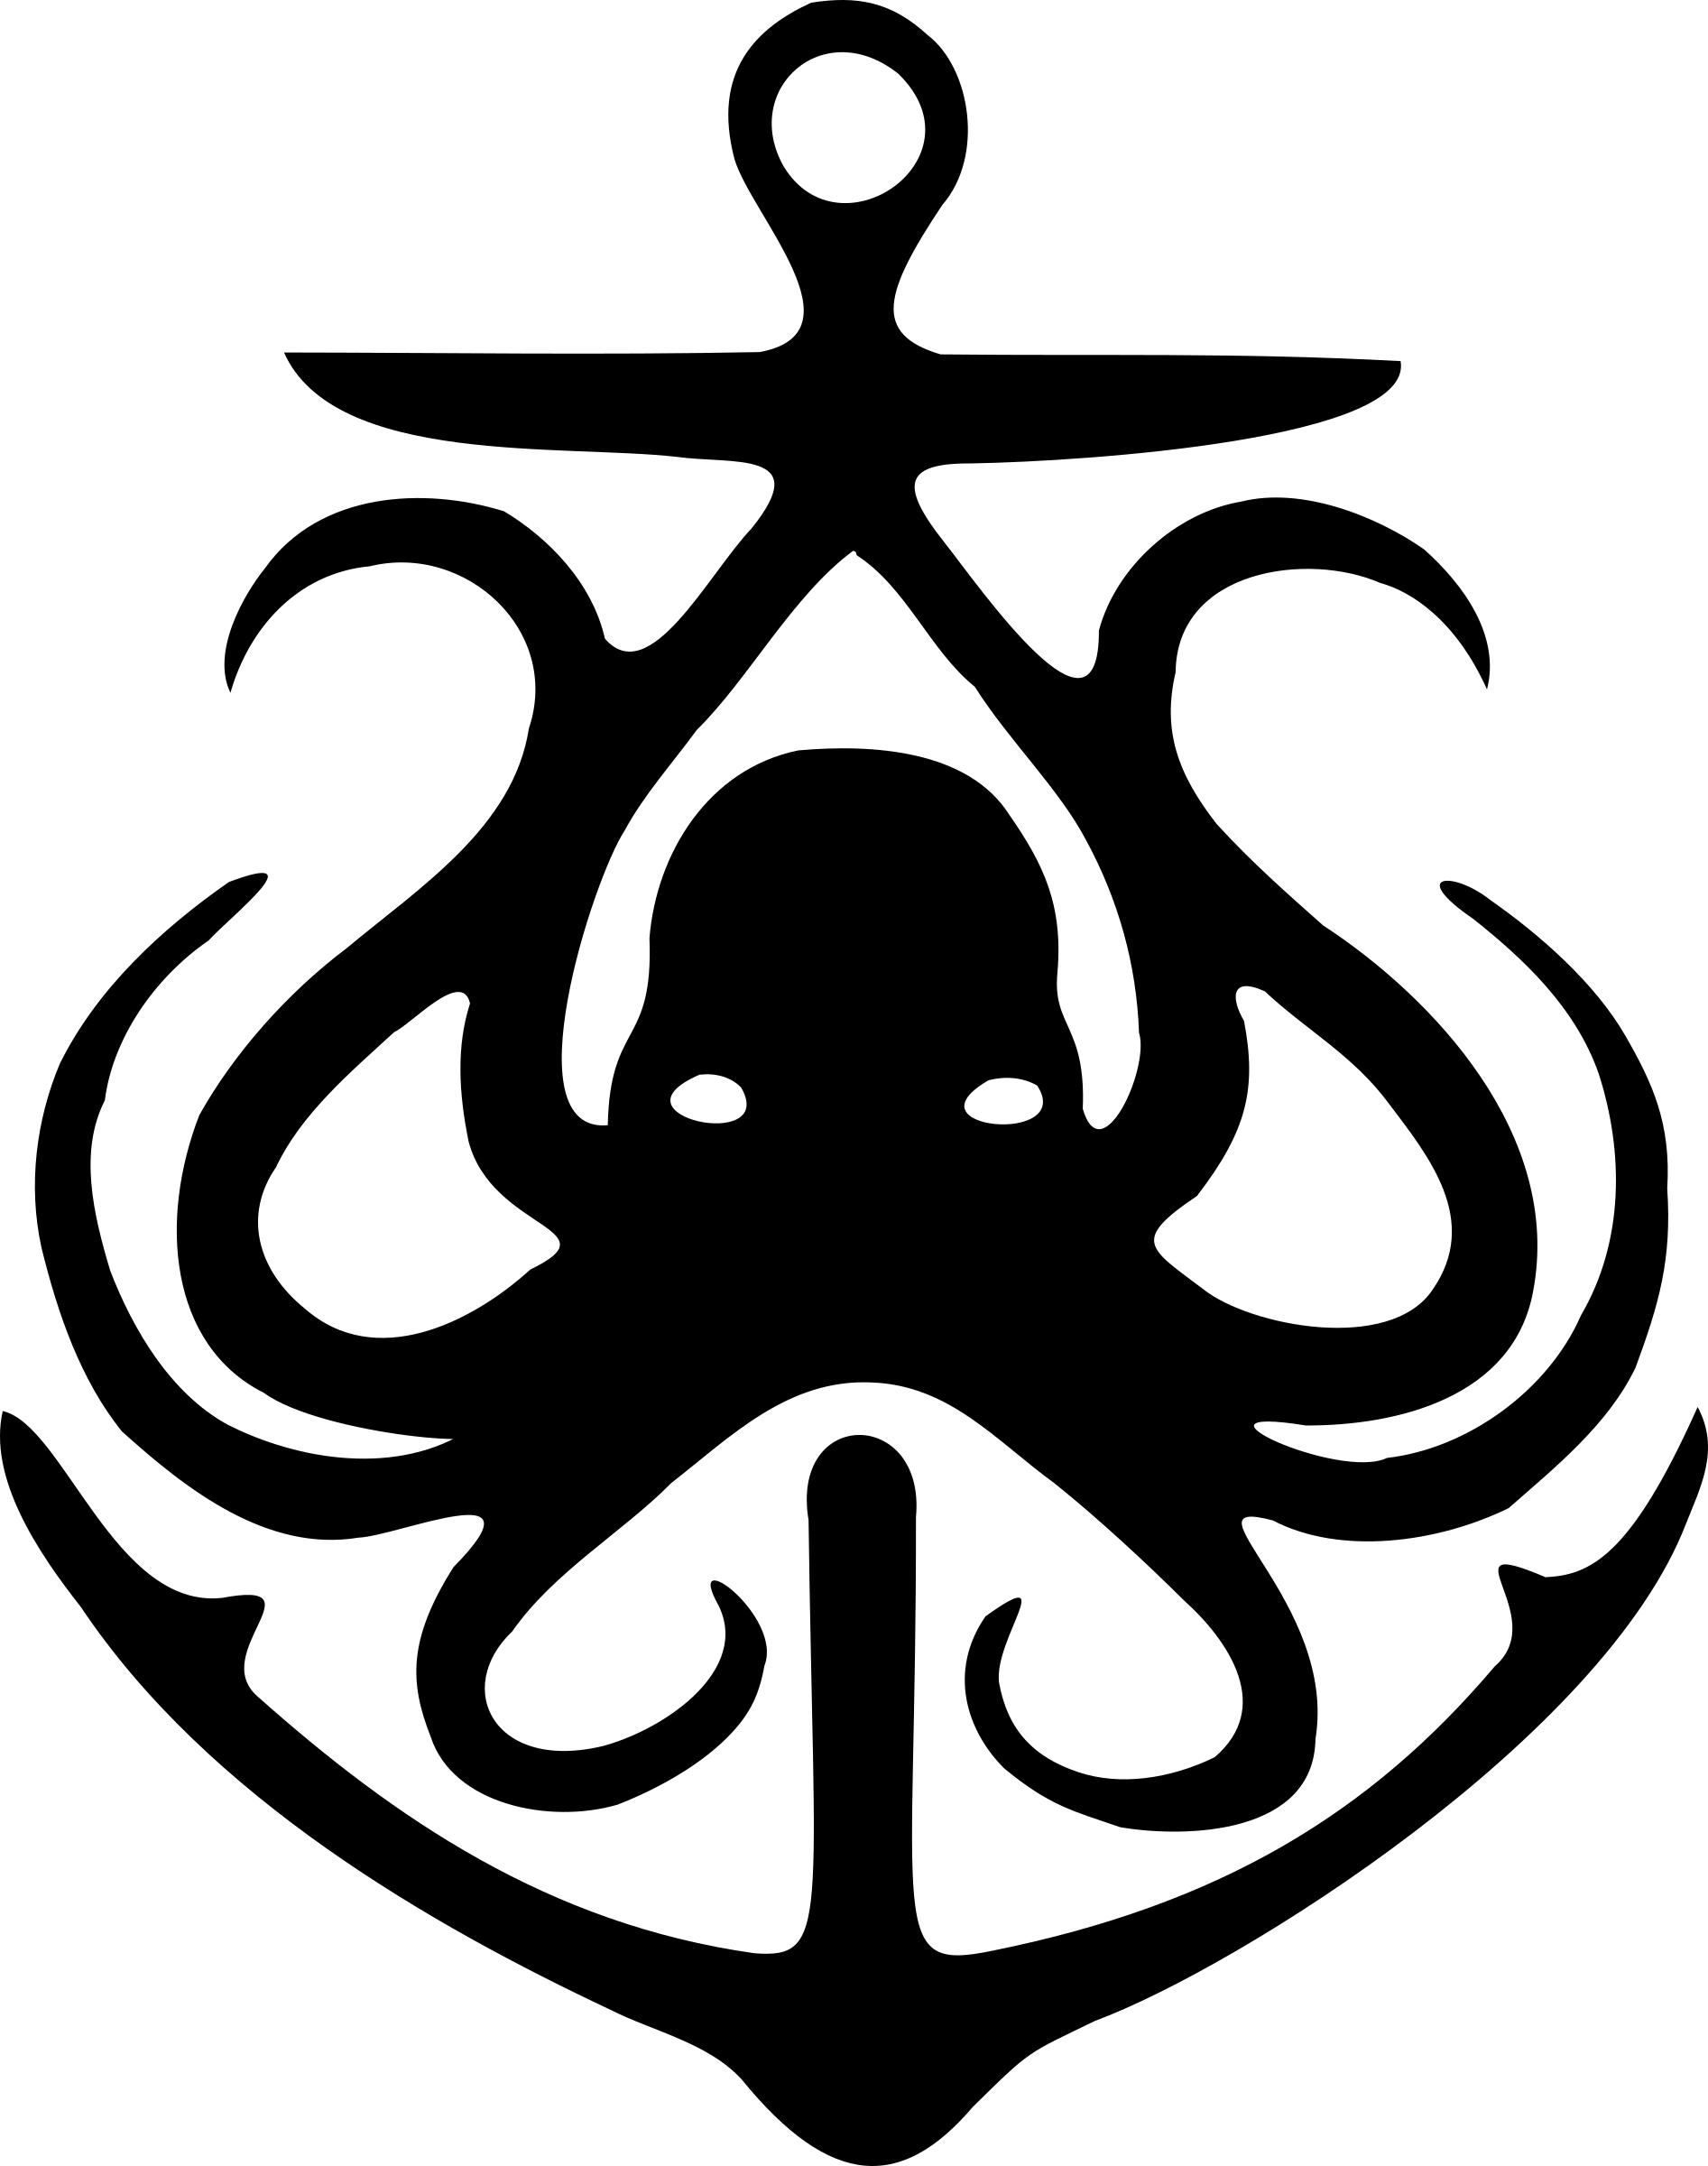 Octopus Anchor png